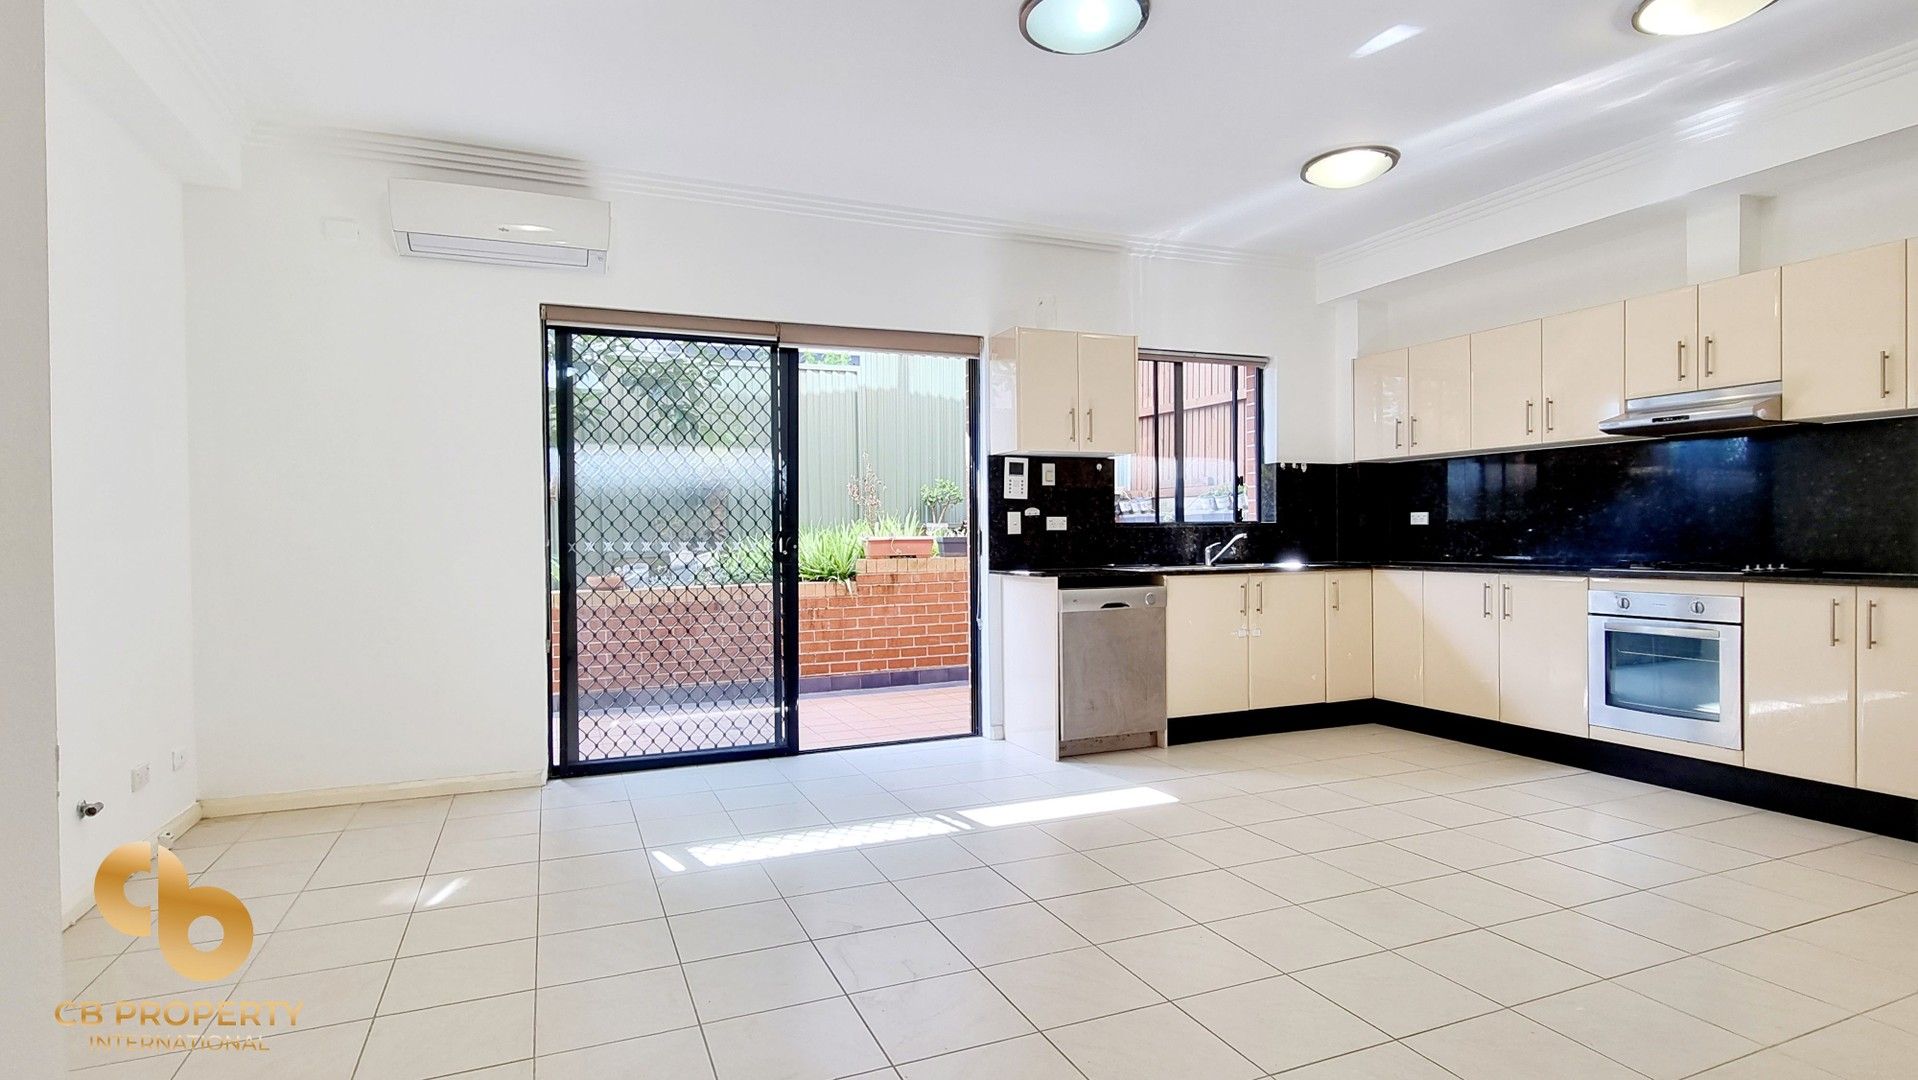 2 bedrooms Apartment / Unit / Flat in 2/260-264 Liverpool Road ENFIELD NSW, 2136